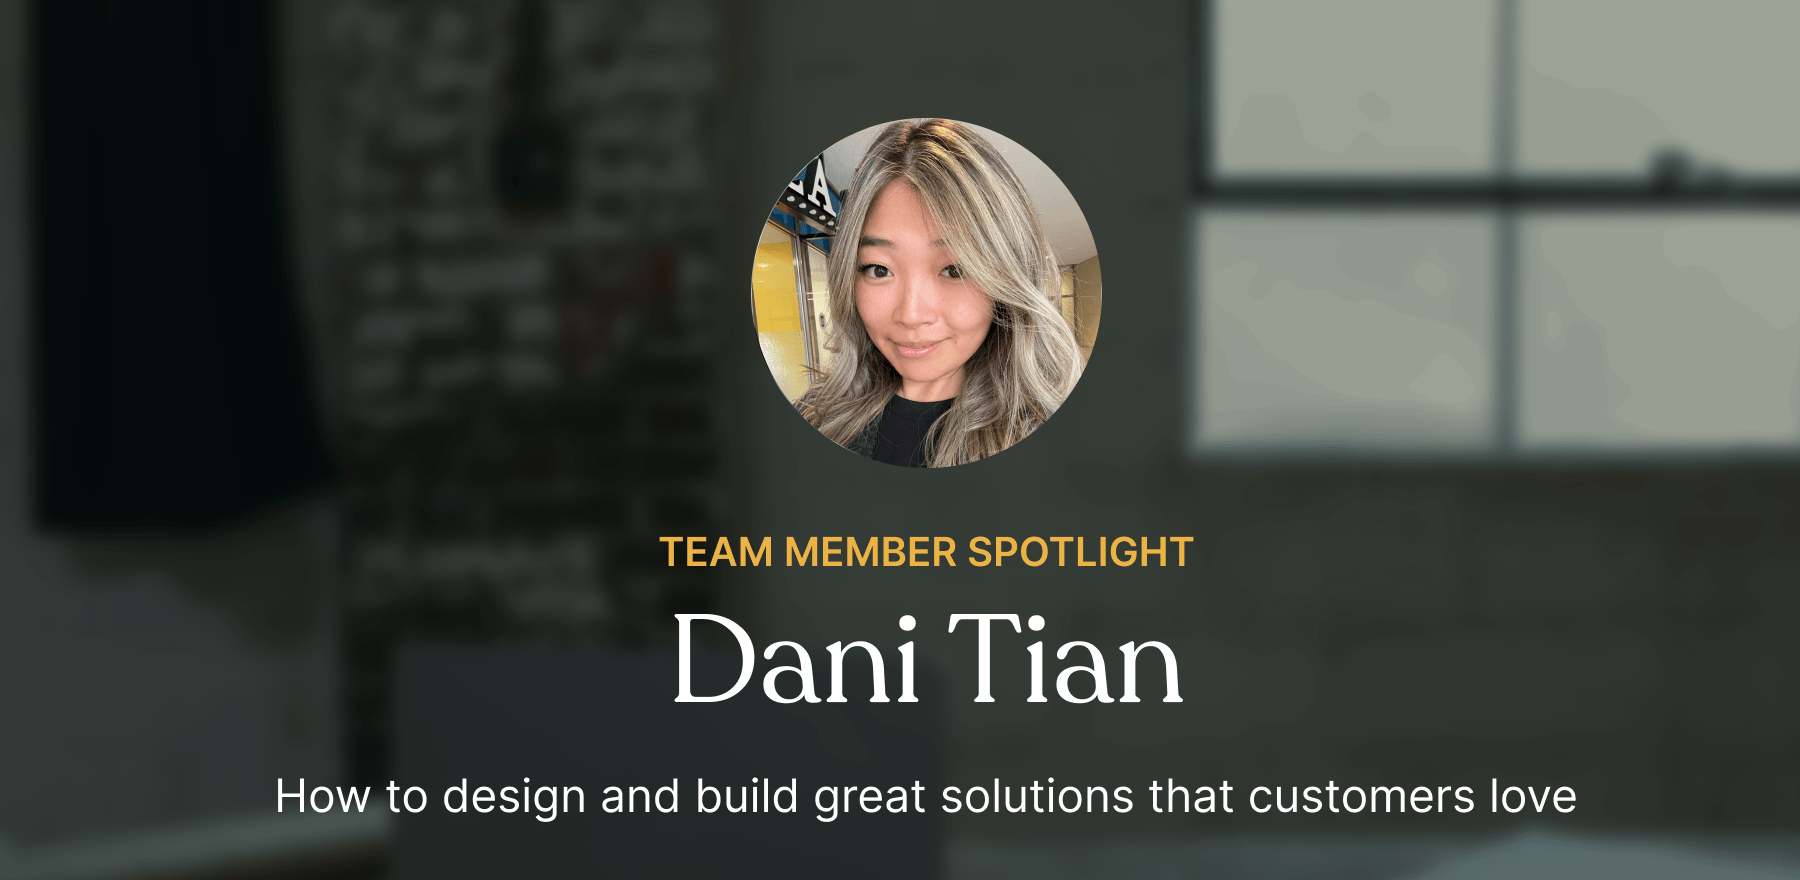 Team spotlight: software engineer Dani Tian on how to build solutions customers love - Featured image